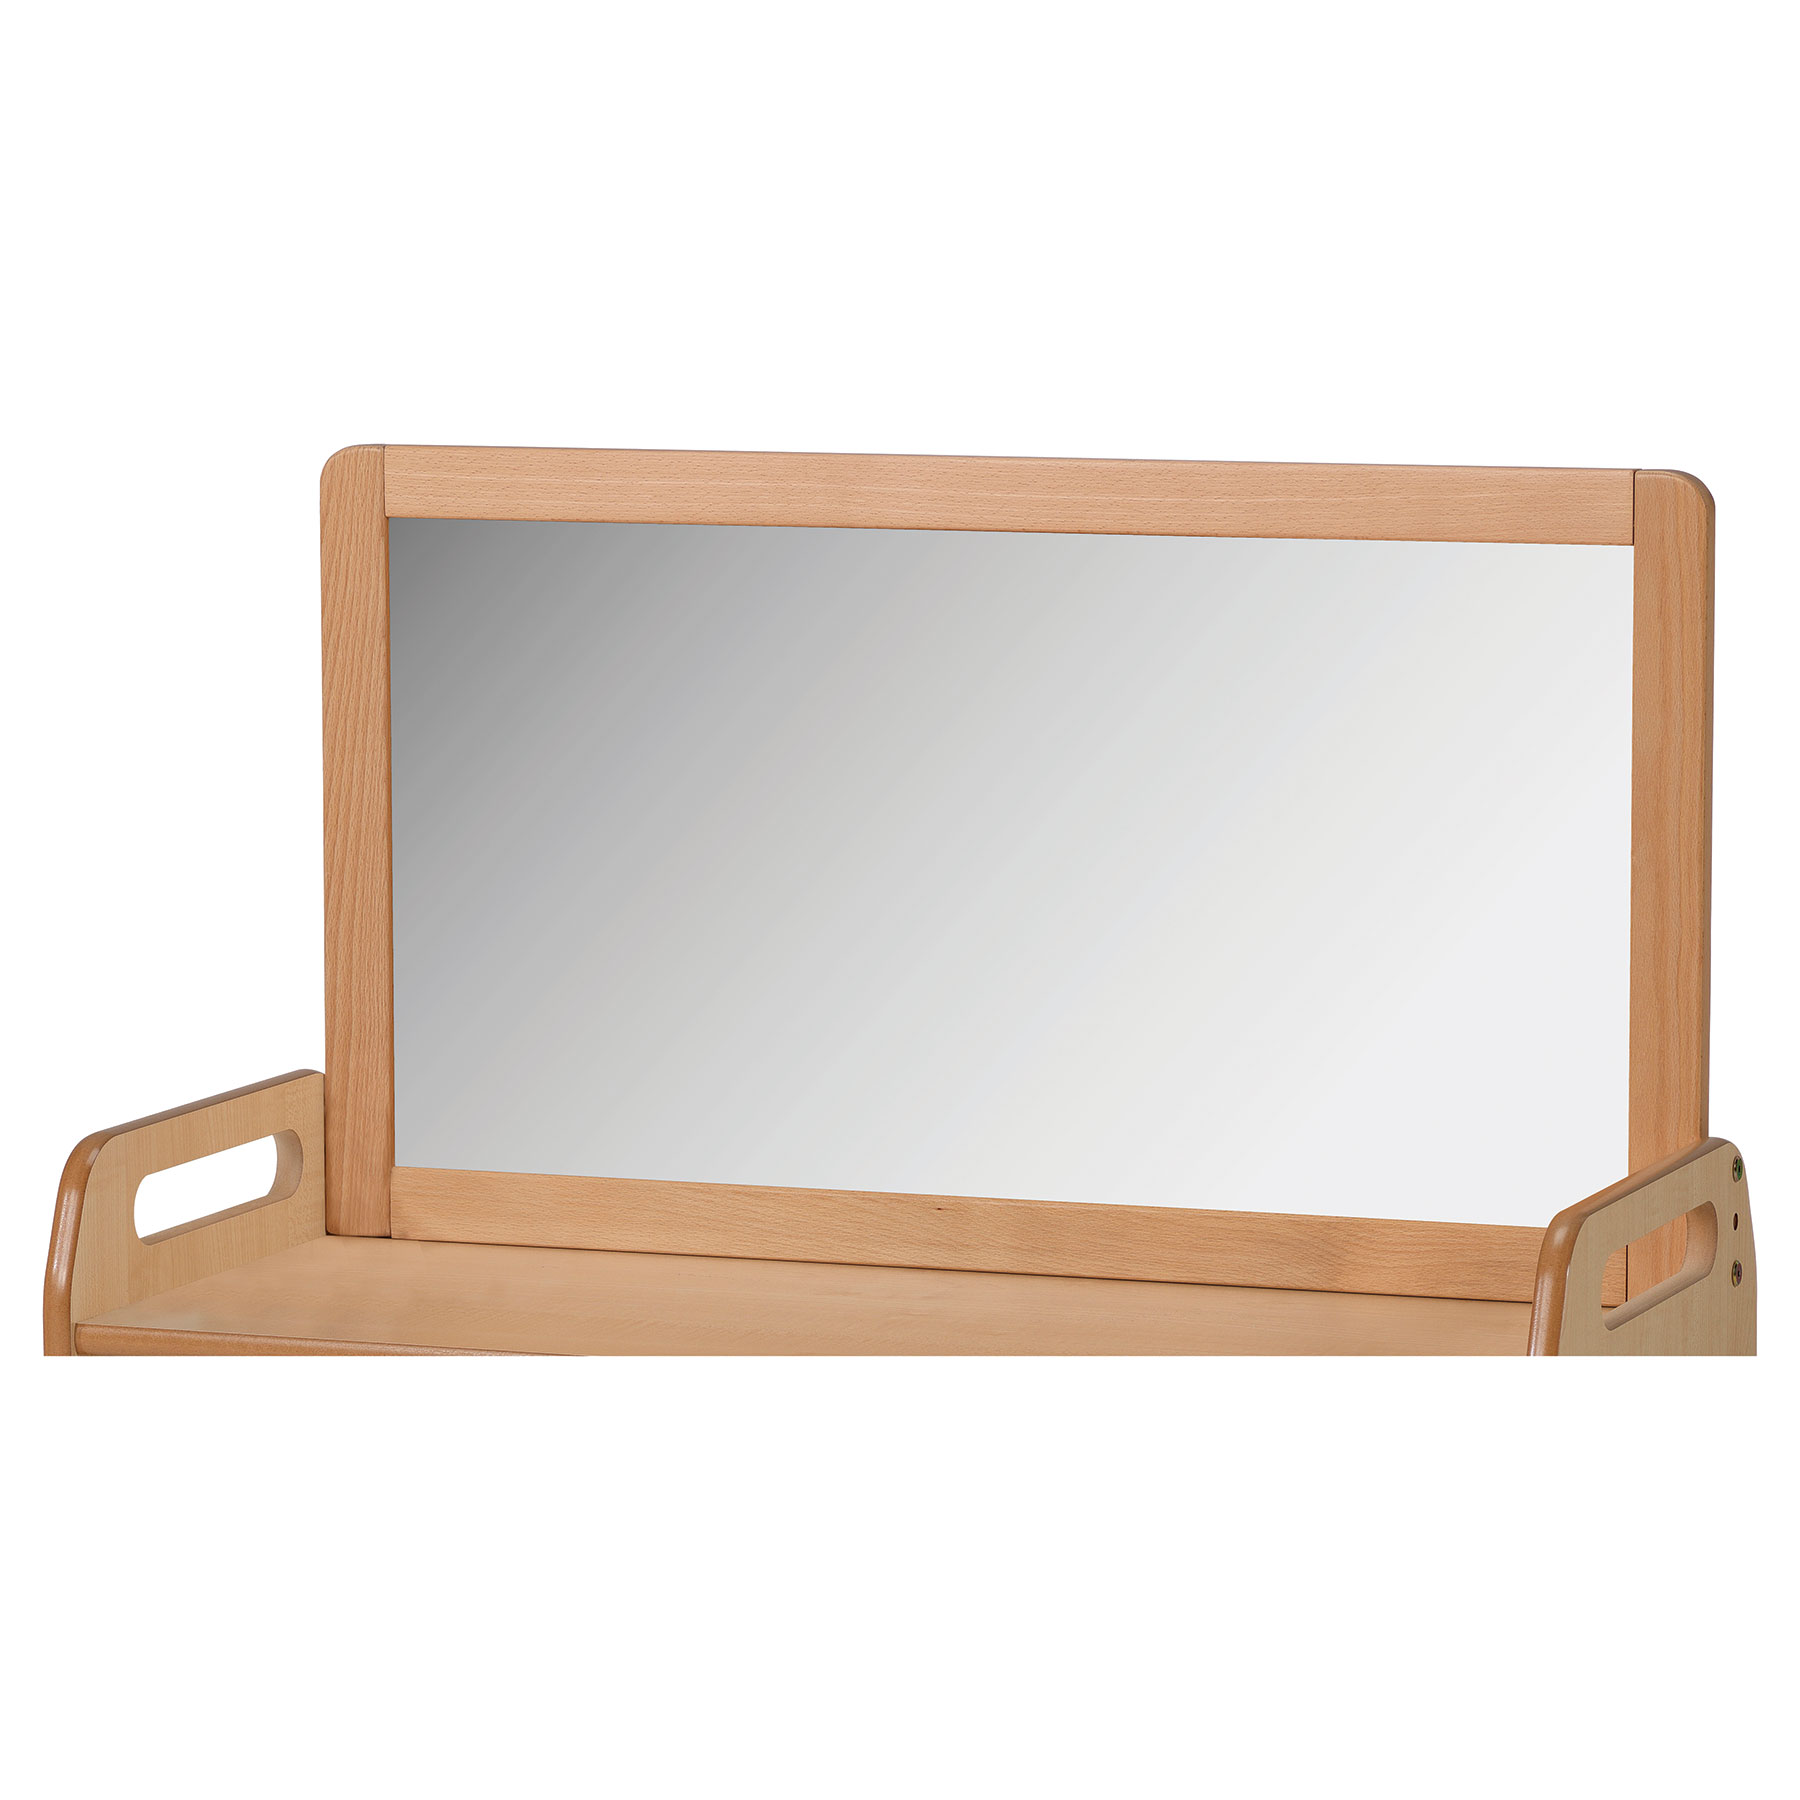 Double Sided Mirror Add-on